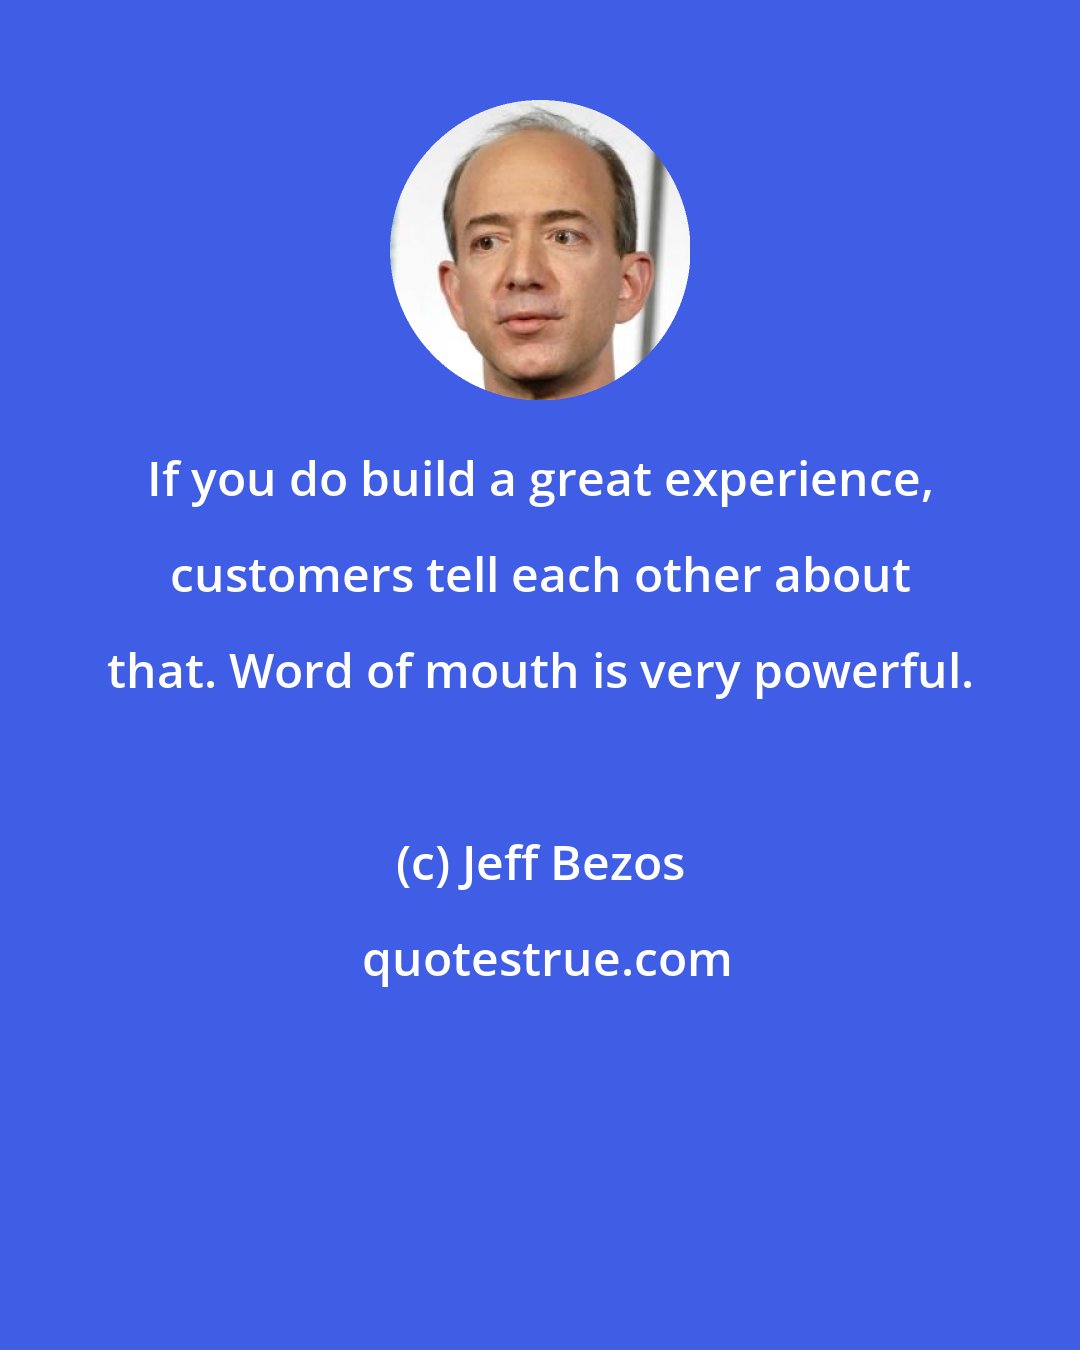 Jeff Bezos: If you do build a great experience, customers tell each other about that. Word of mouth is very powerful.